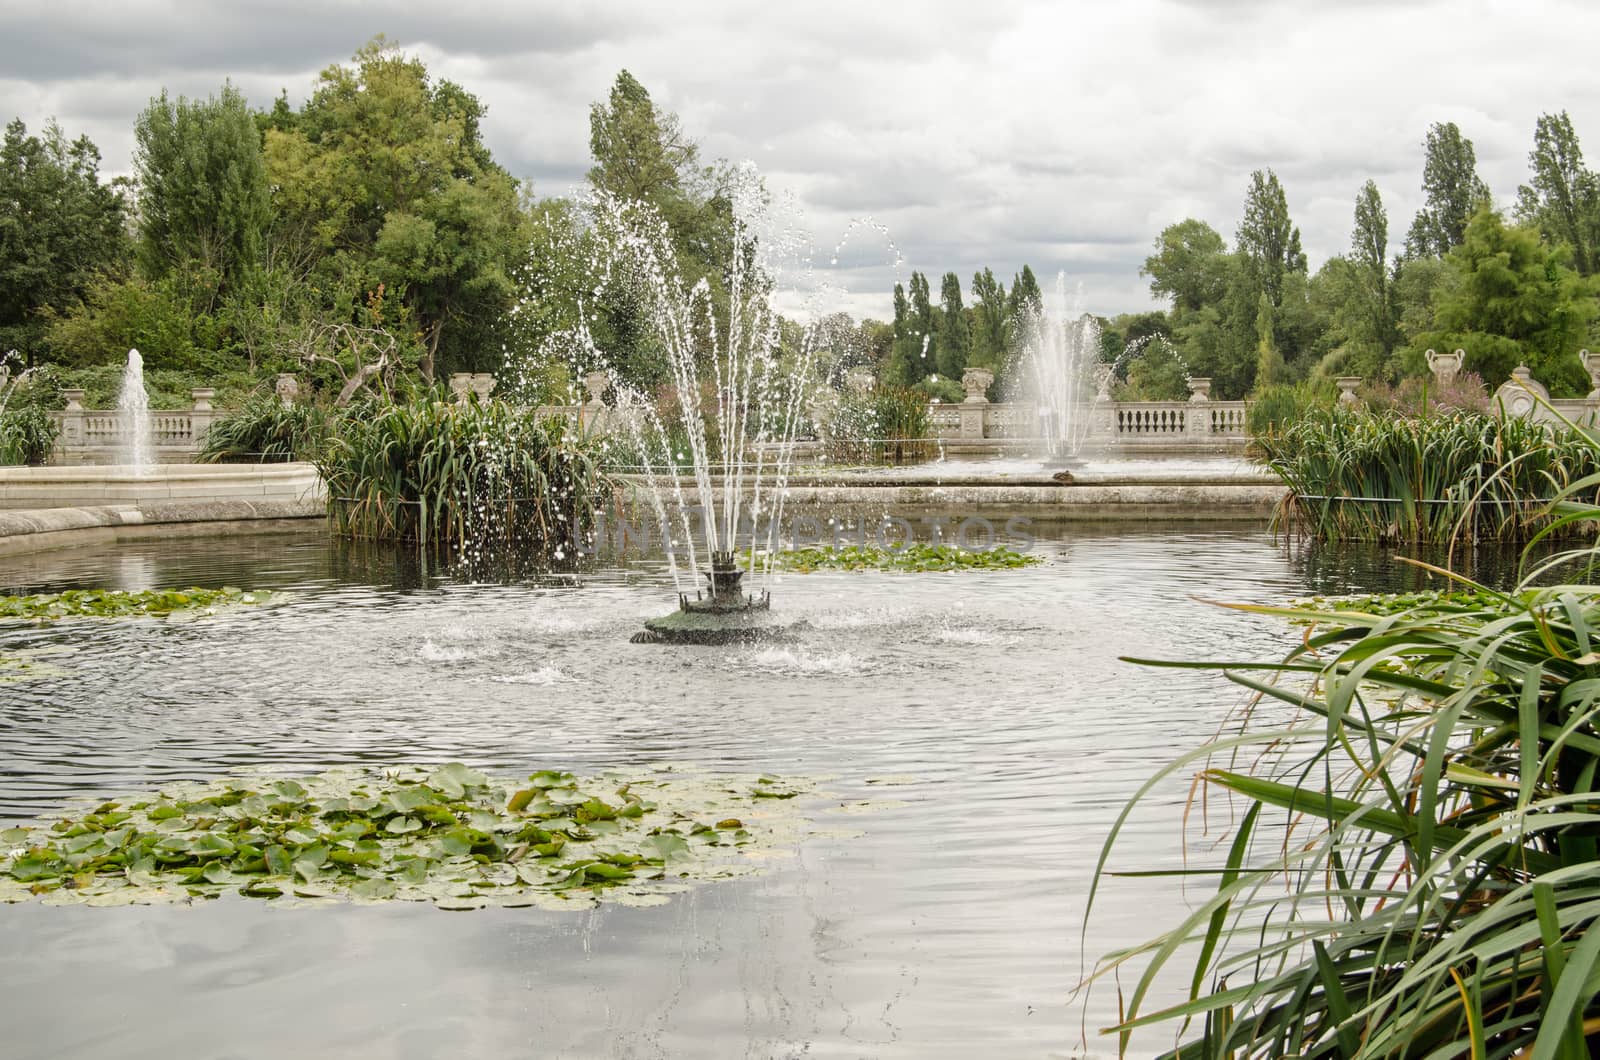 Fountains in the Italian Gardens of Hyde Park on a cloudy day in London.